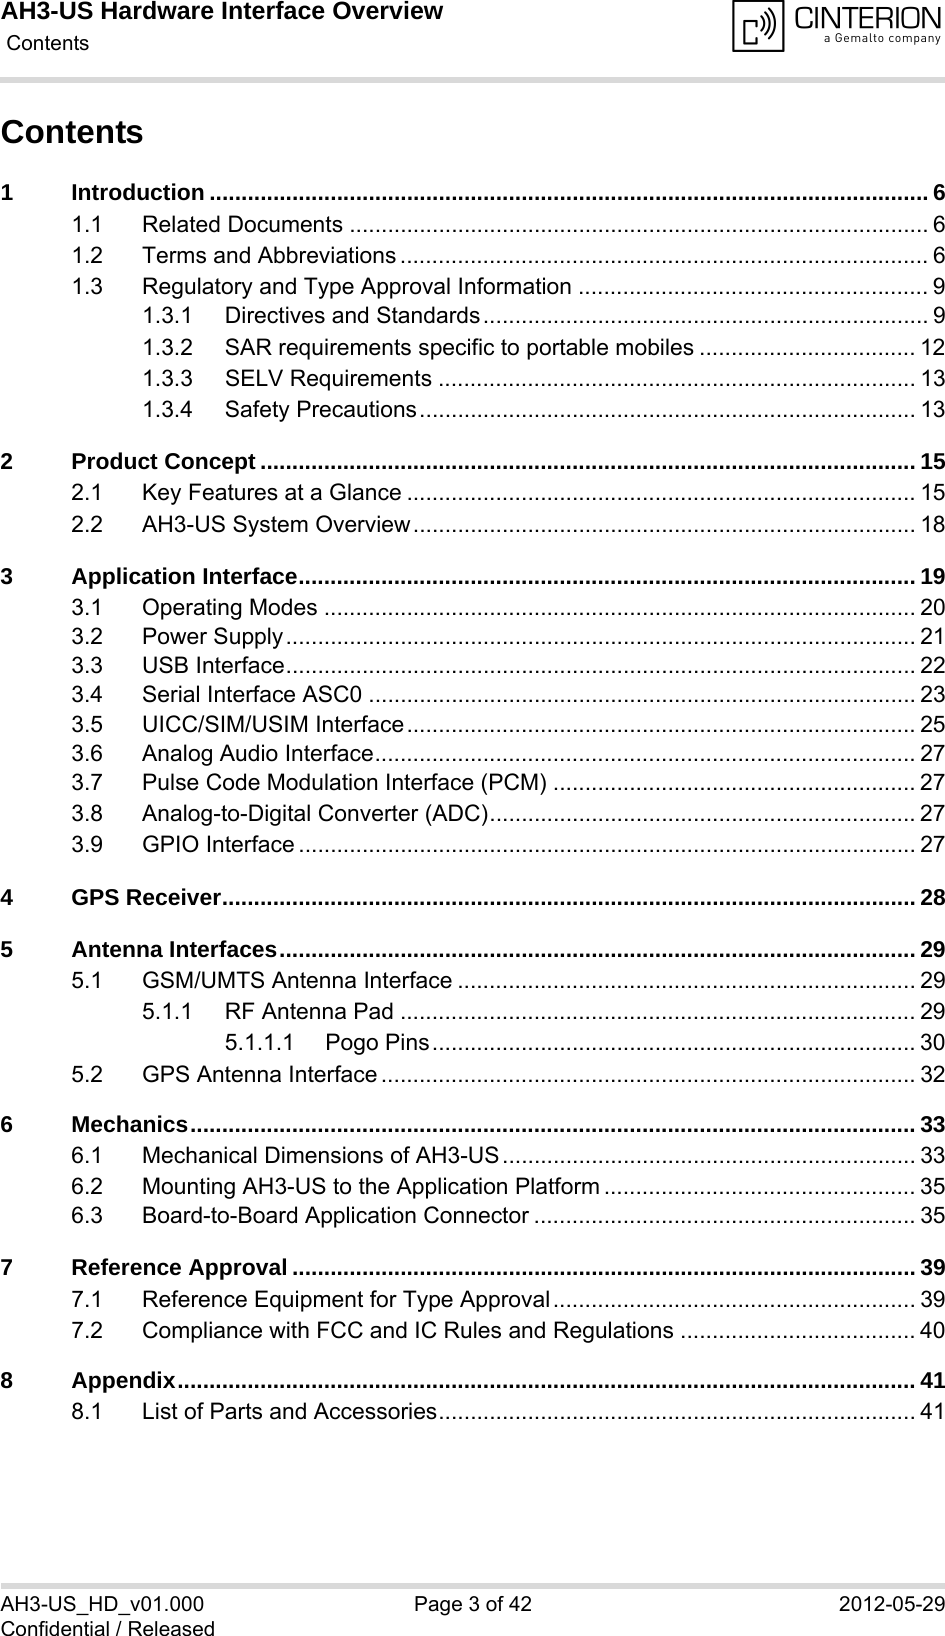 AH3-US Hardware Interface Overview Contents42AH3-US_HD_v01.000 Page 3 of 42 2012-05-29Confidential / ReleasedContents1 Introduction ................................................................................................................. 61.1 Related Documents ........................................................................................... 61.2 Terms and Abbreviations ................................................................................... 61.3 Regulatory and Type Approval Information ....................................................... 91.3.1 Directives and Standards...................................................................... 91.3.2 SAR requirements specific to portable mobiles .................................. 121.3.3 SELV Requirements ........................................................................... 131.3.4 Safety Precautions.............................................................................. 132 Product Concept ....................................................................................................... 152.1 Key Features at a Glance ................................................................................ 152.2 AH3-US System Overview............................................................................... 183 Application Interface................................................................................................. 193.1 Operating Modes ............................................................................................. 203.2 Power Supply................................................................................................... 213.3 USB Interface................................................................................................... 223.4 Serial Interface ASC0 ...................................................................................... 233.5 UICC/SIM/USIM Interface................................................................................ 253.6 Analog Audio Interface..................................................................................... 273.7 Pulse Code Modulation Interface (PCM) ......................................................... 273.8 Analog-to-Digital Converter (ADC)................................................................... 273.9 GPIO Interface ................................................................................................. 274 GPS Receiver............................................................................................................. 285 Antenna Interfaces.................................................................................................... 295.1 GSM/UMTS Antenna Interface ........................................................................ 295.1.1 RF Antenna Pad ................................................................................. 295.1.1.1 Pogo Pins............................................................................ 305.2 GPS Antenna Interface .................................................................................... 326 Mechanics.................................................................................................................. 336.1 Mechanical Dimensions of AH3-US................................................................. 336.2 Mounting AH3-US to the Application Platform ................................................. 356.3 Board-to-Board Application Connector ............................................................ 357 Reference Approval .................................................................................................. 397.1 Reference Equipment for Type Approval......................................................... 397.2 Compliance with FCC and IC Rules and Regulations ..................................... 408 Appendix.................................................................................................................... 418.1 List of Parts and Accessories........................................................................... 41